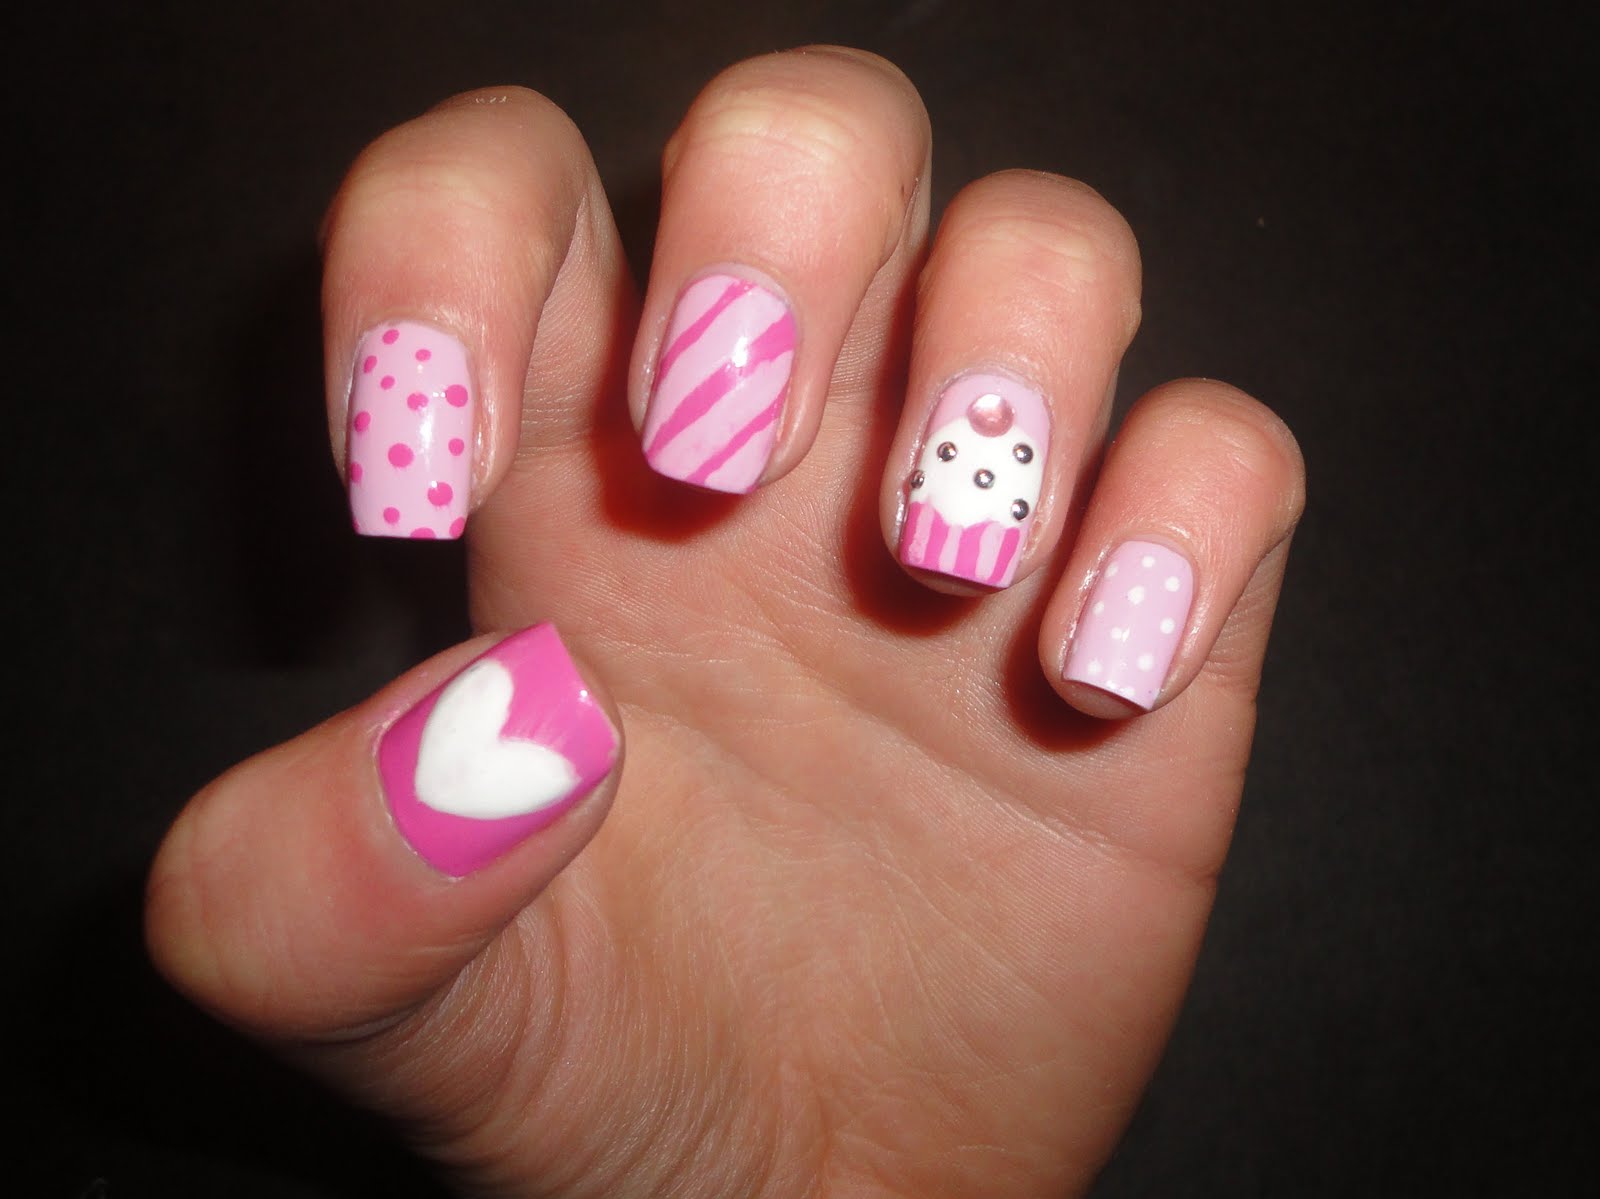 2. Cute and Simple Dot Nail Design - wide 8